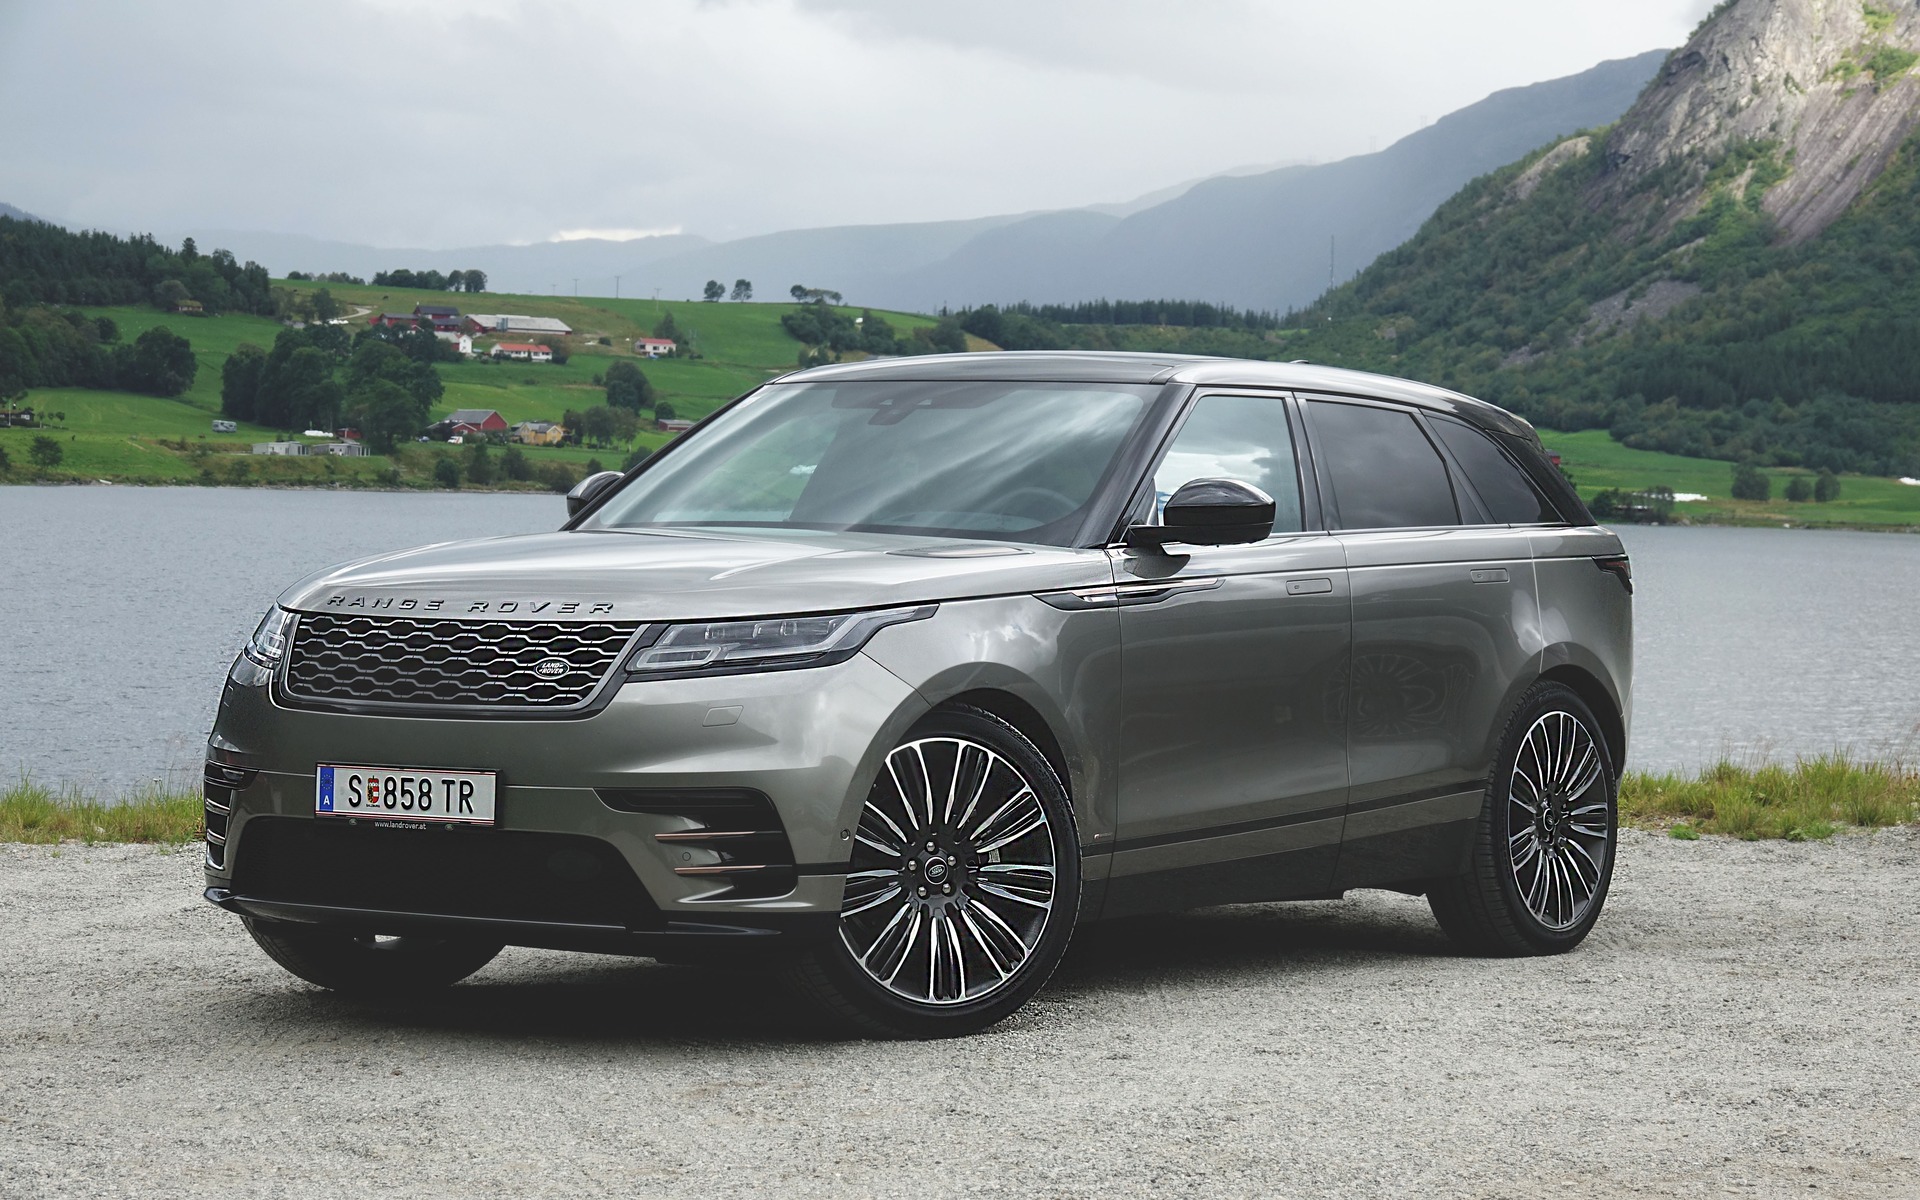 2019 Land Rover Range Rover Velar R-Dynamic HSE P380 Specifications